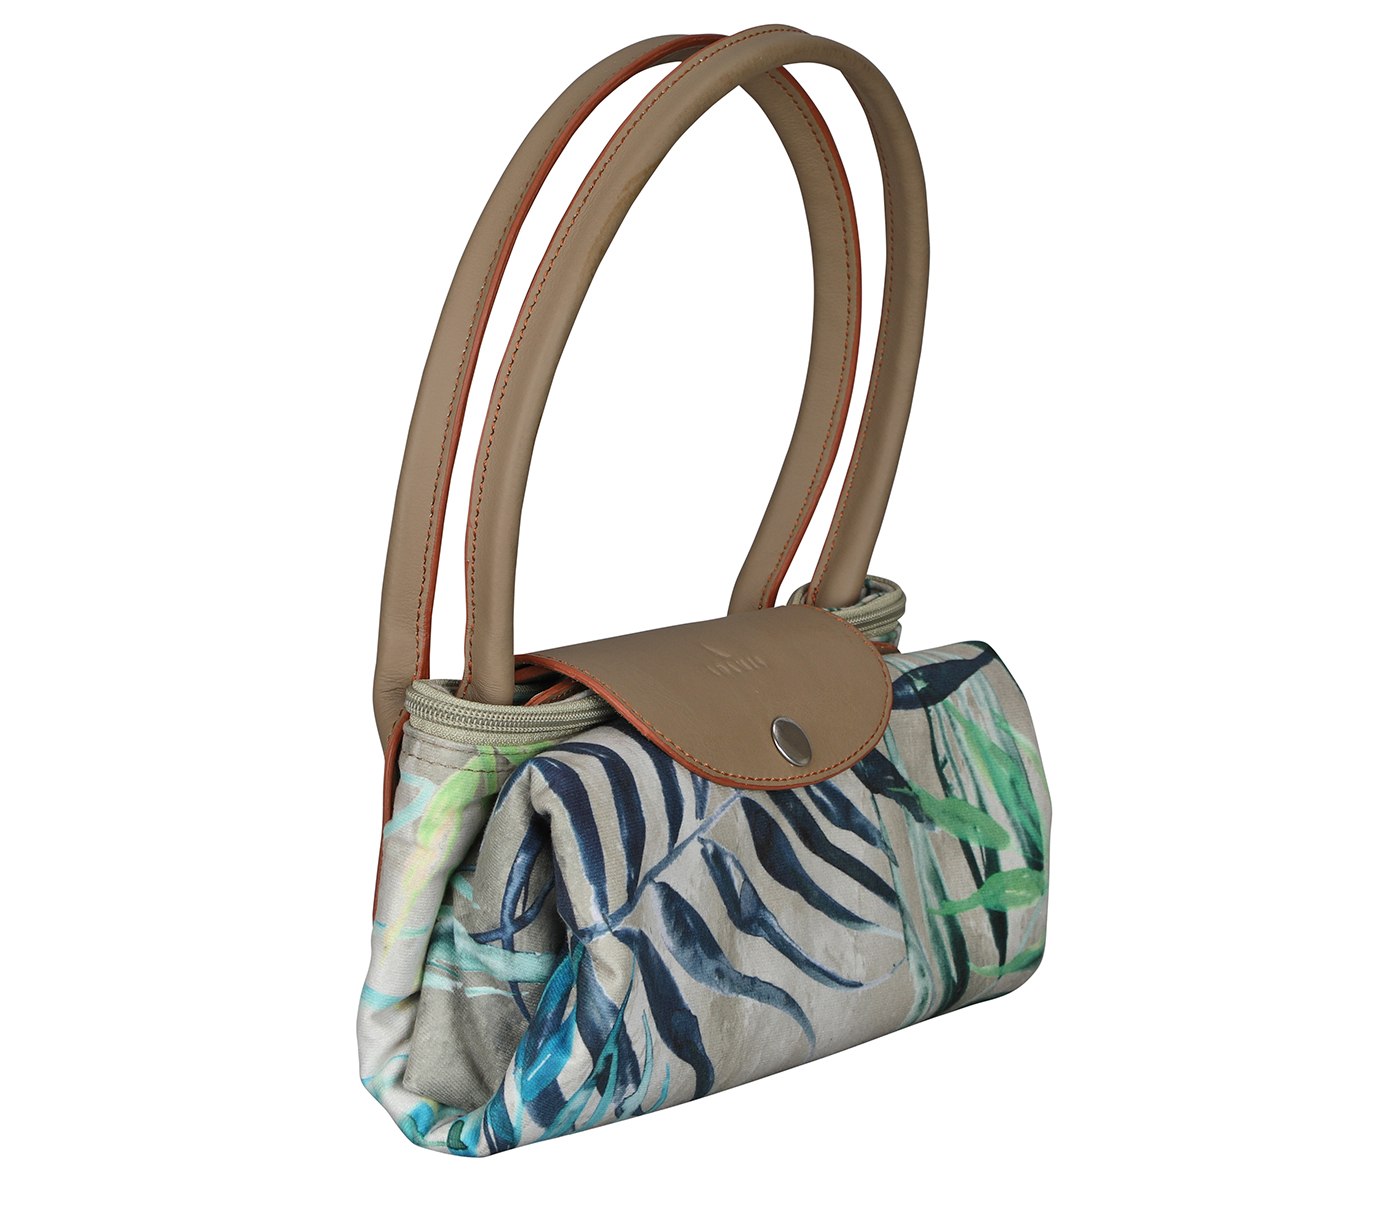 B881--Maite Folding tote in Abstract print material with genuine leather handles and flap - Green